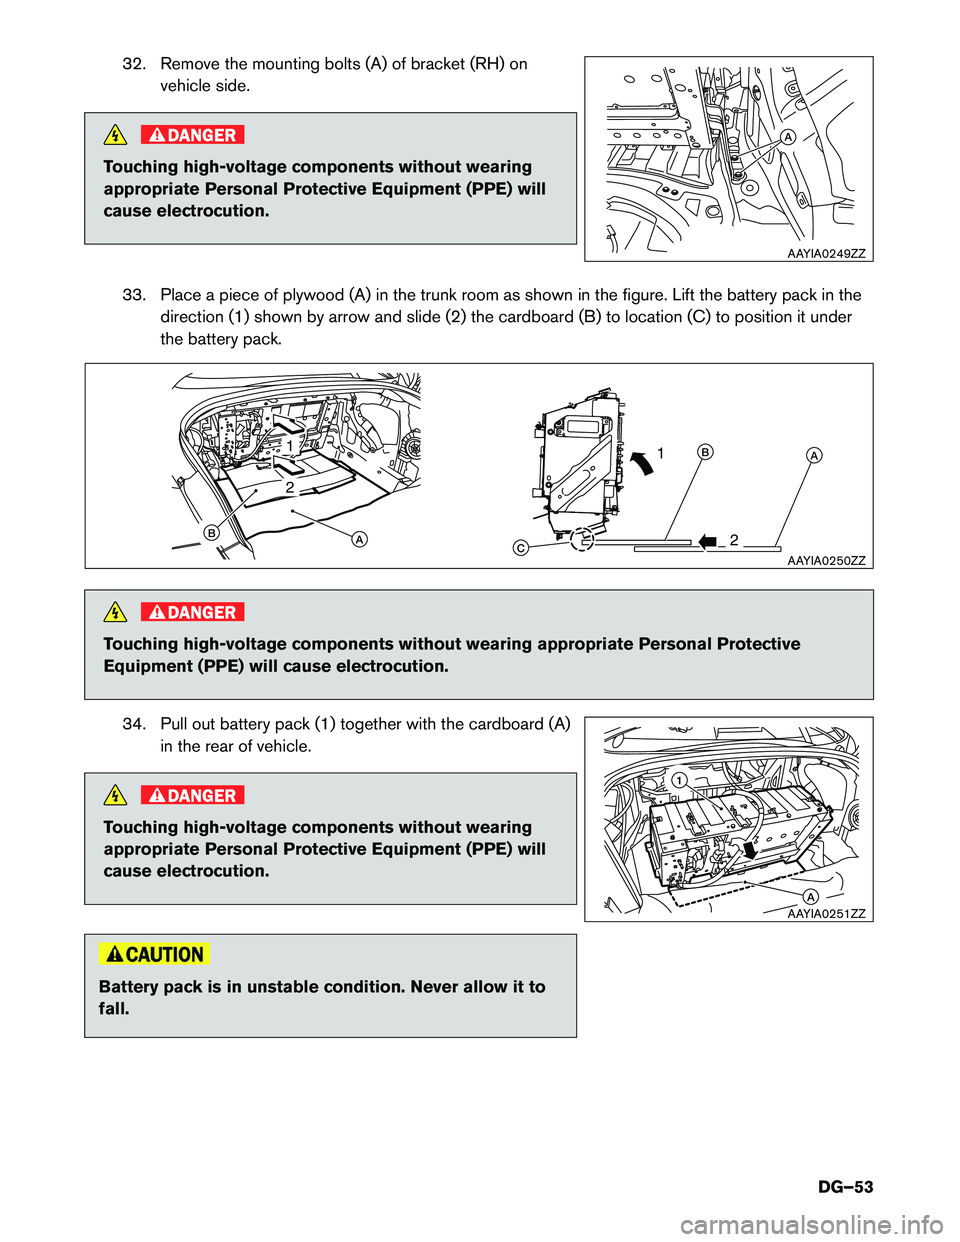 INFINITI Q50 HYBRID 2018  Dismantling Guide 32. Remove the mounting bolts (A) of bracket (RH) on
vehicle side. DANGER
Touching high-voltage components without wearing
appropriate

Personal Protective Equipment (PPE) will
cause electrocution.
33